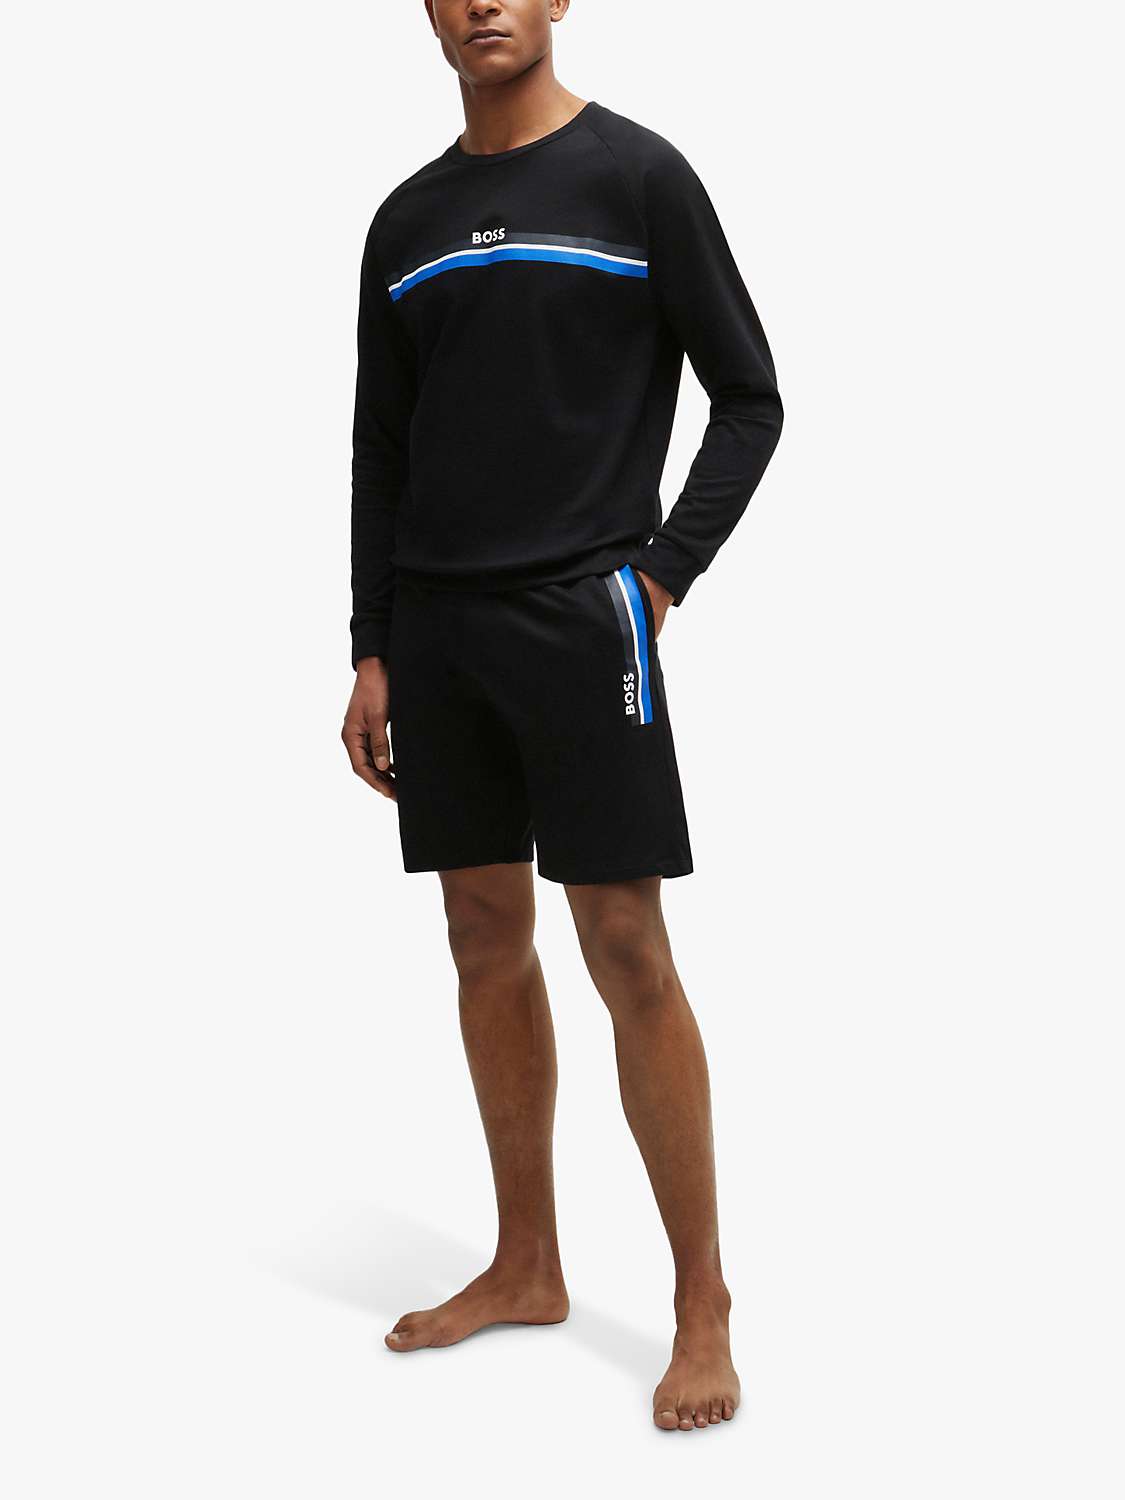 Buy BOSS Authentic Shorts, Black Online at johnlewis.com